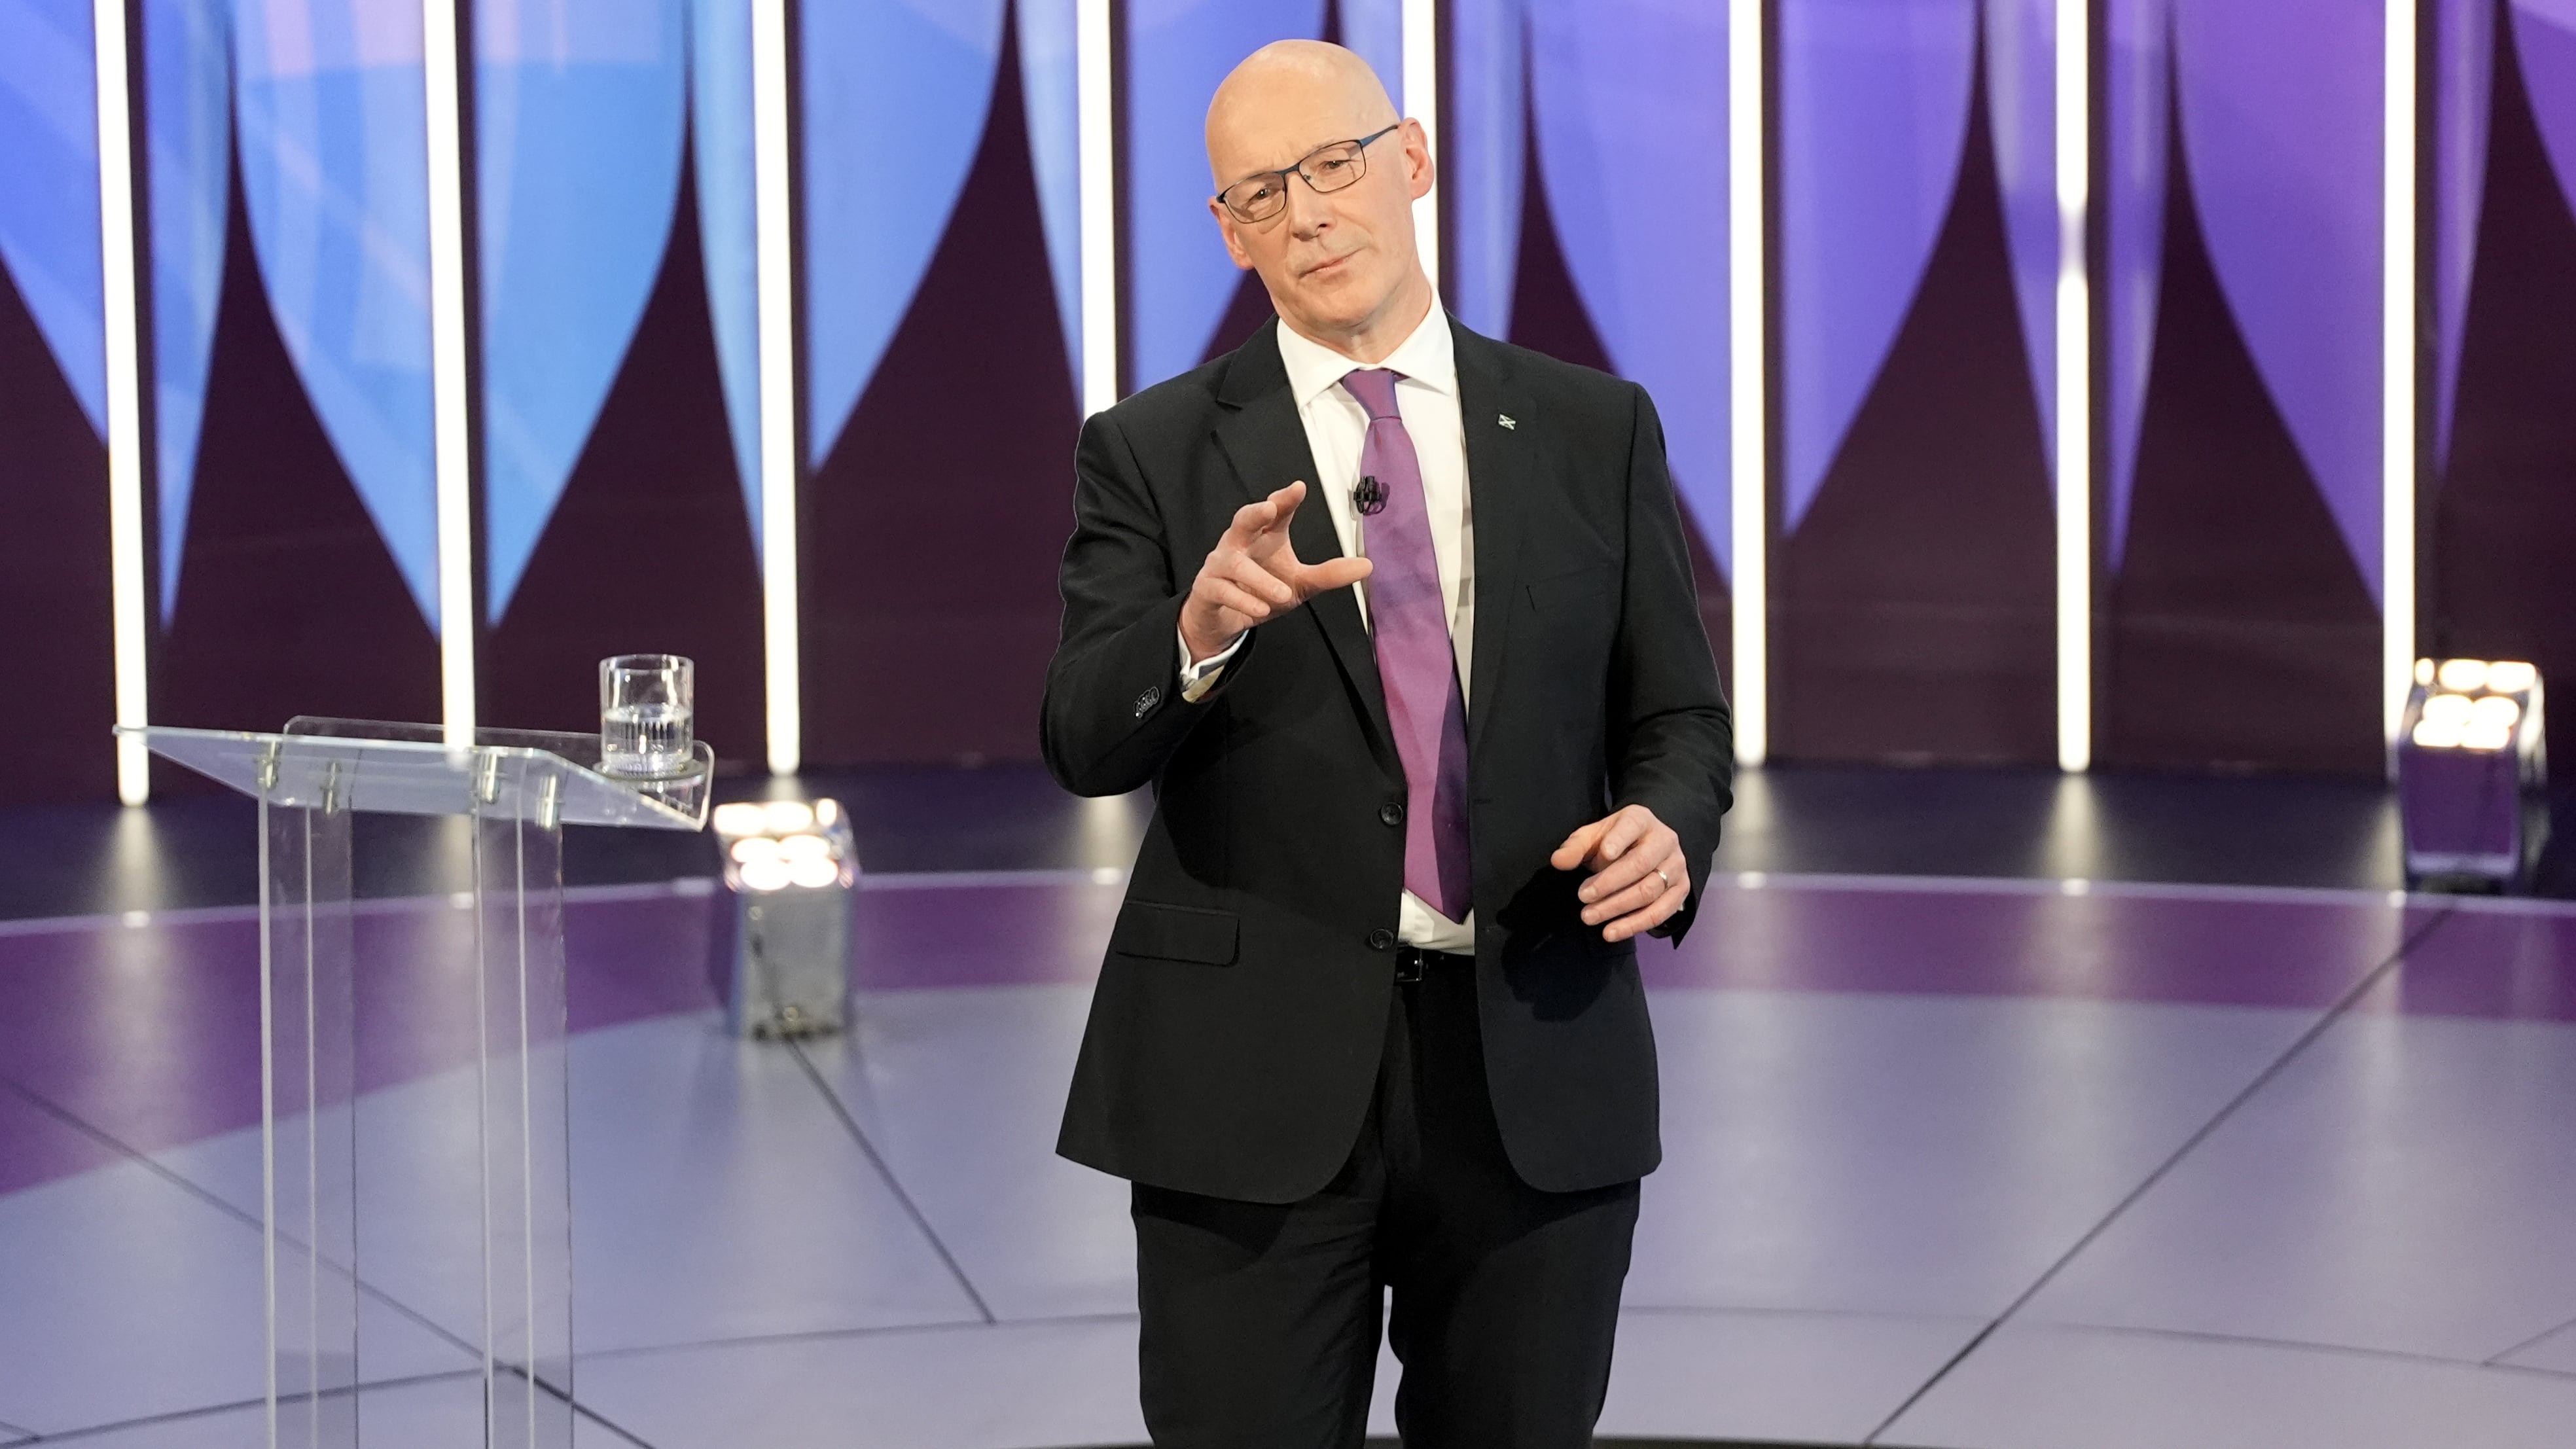 Scottish First Minister and SNP leader John Swinney told a live TV audience on the BBC’s Question Time Leaders’ Special that the Conservative government ‘cannot be out of office quick enough’